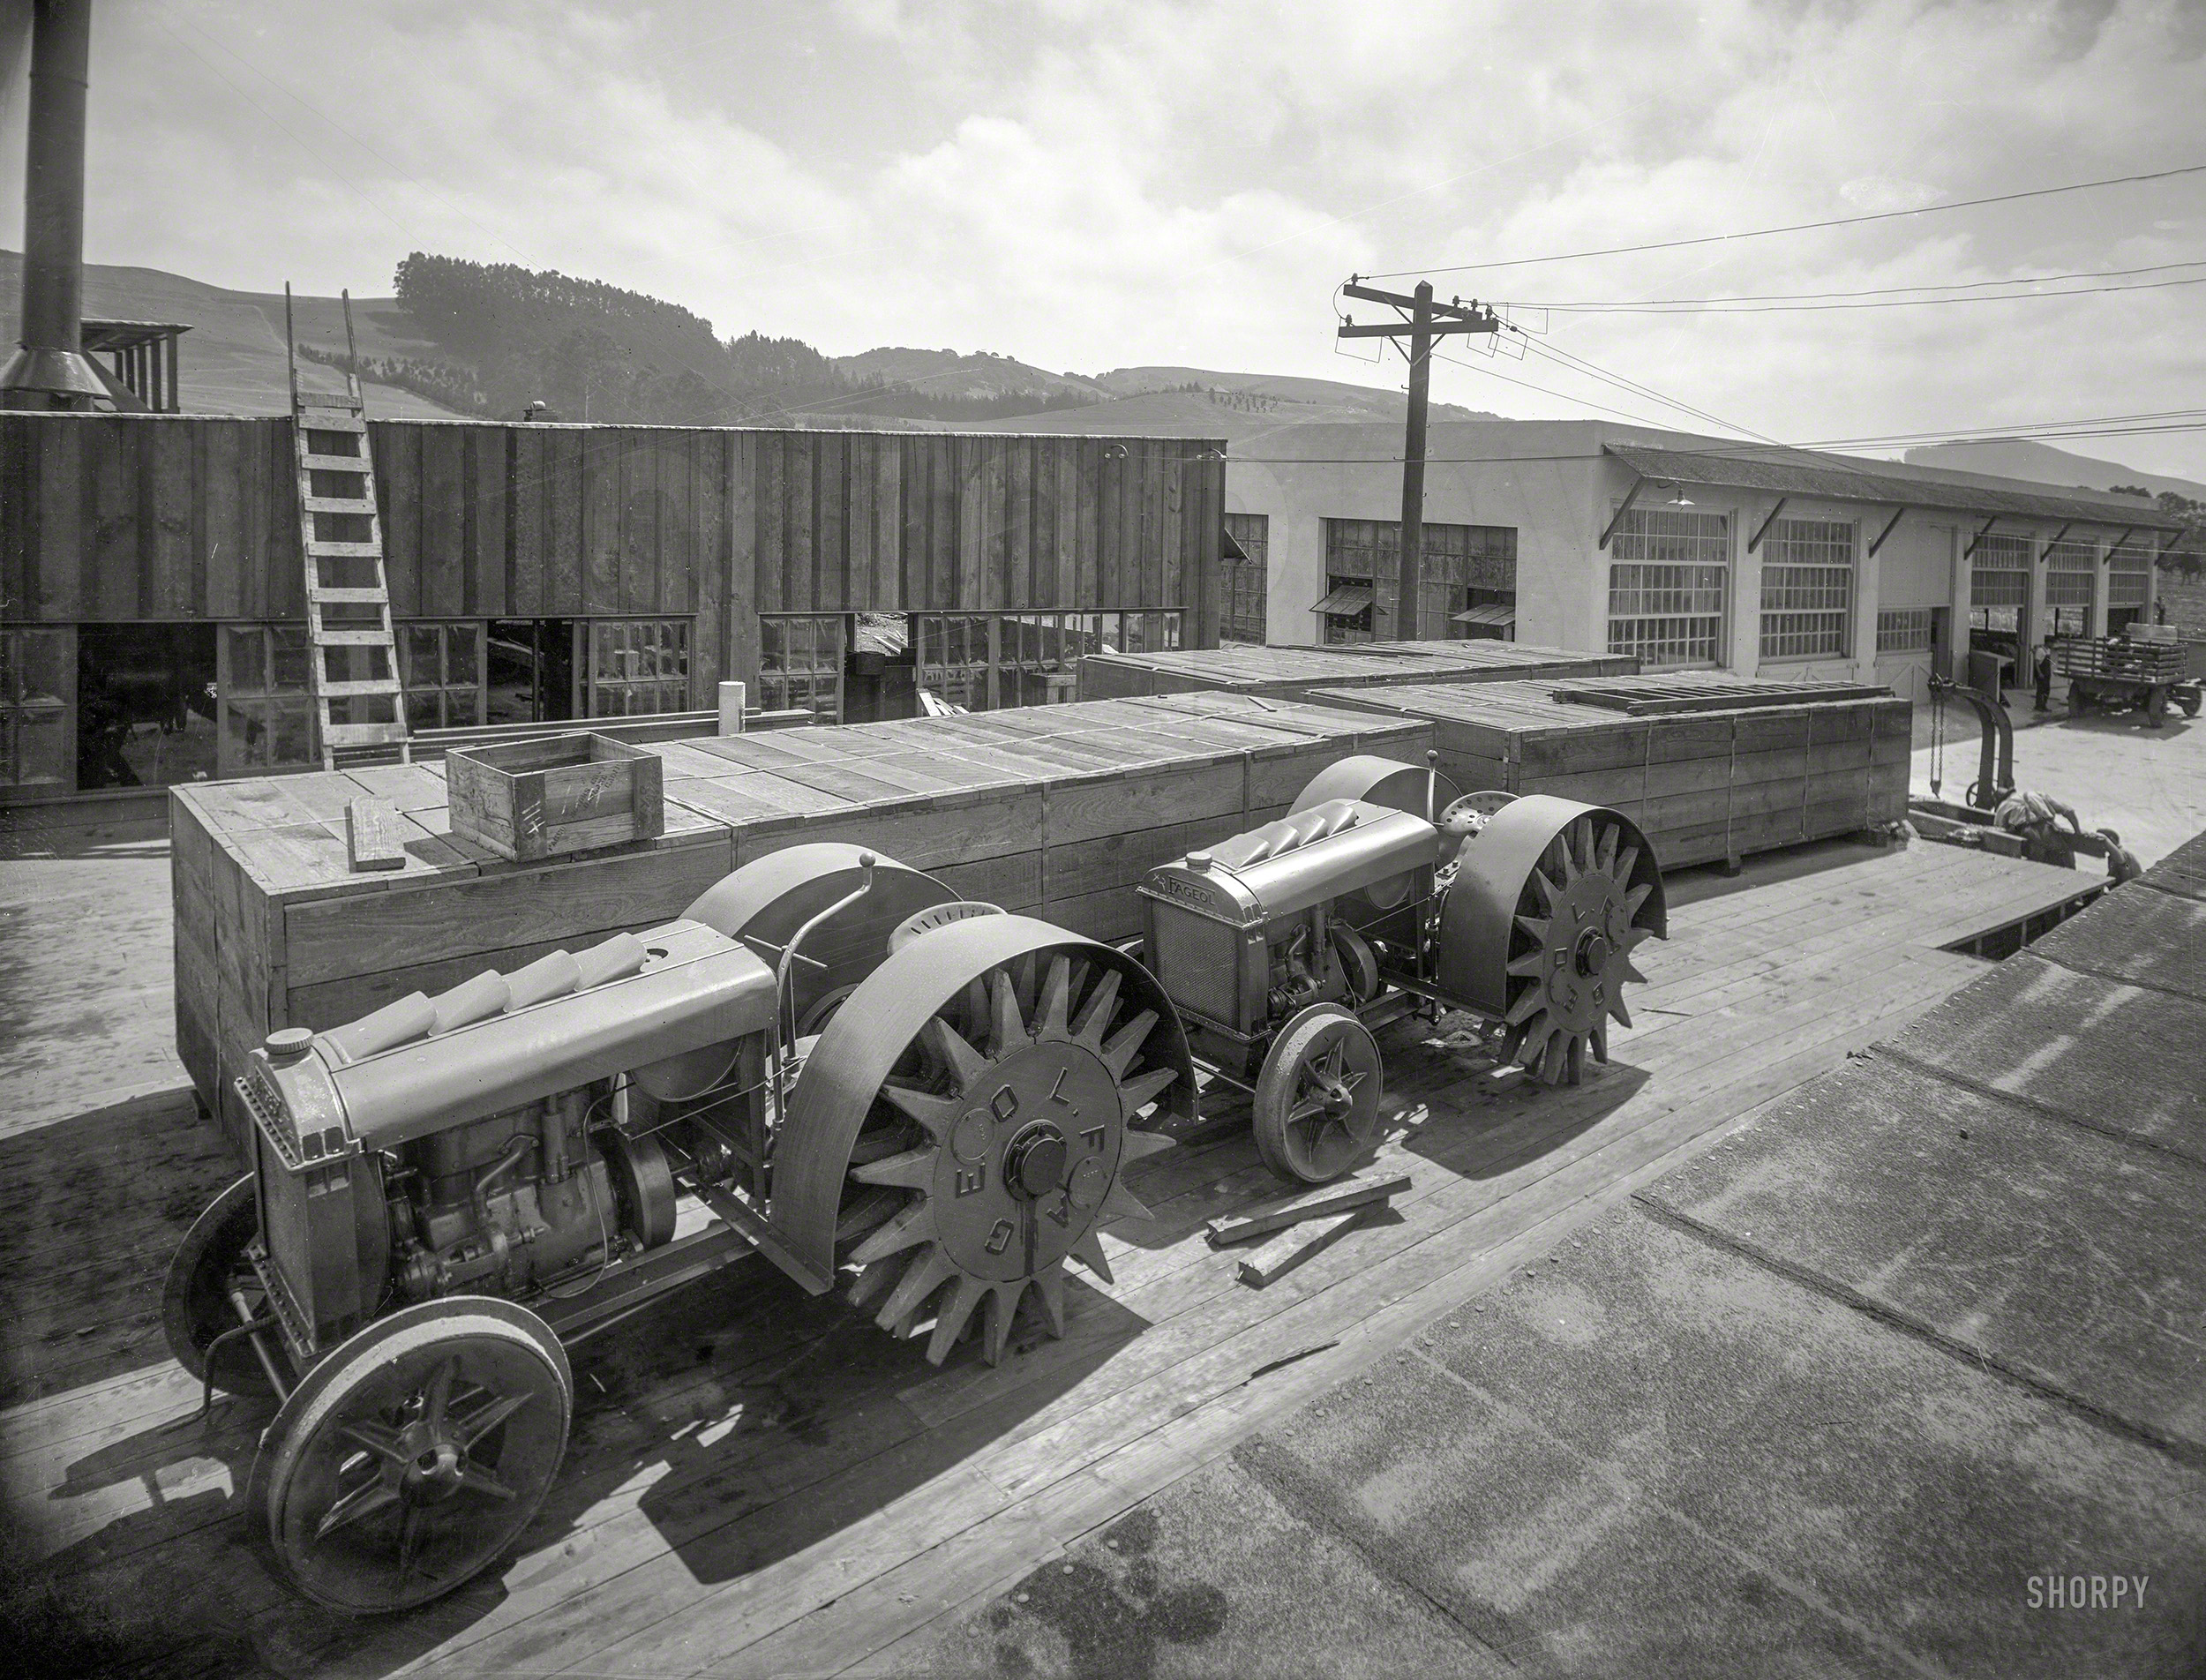 Oakland, 1918. "Crating Fageol 'walking tractors' at factory." Our first look at an unusual agricultural implement. 8x10 glass negative. View full size.